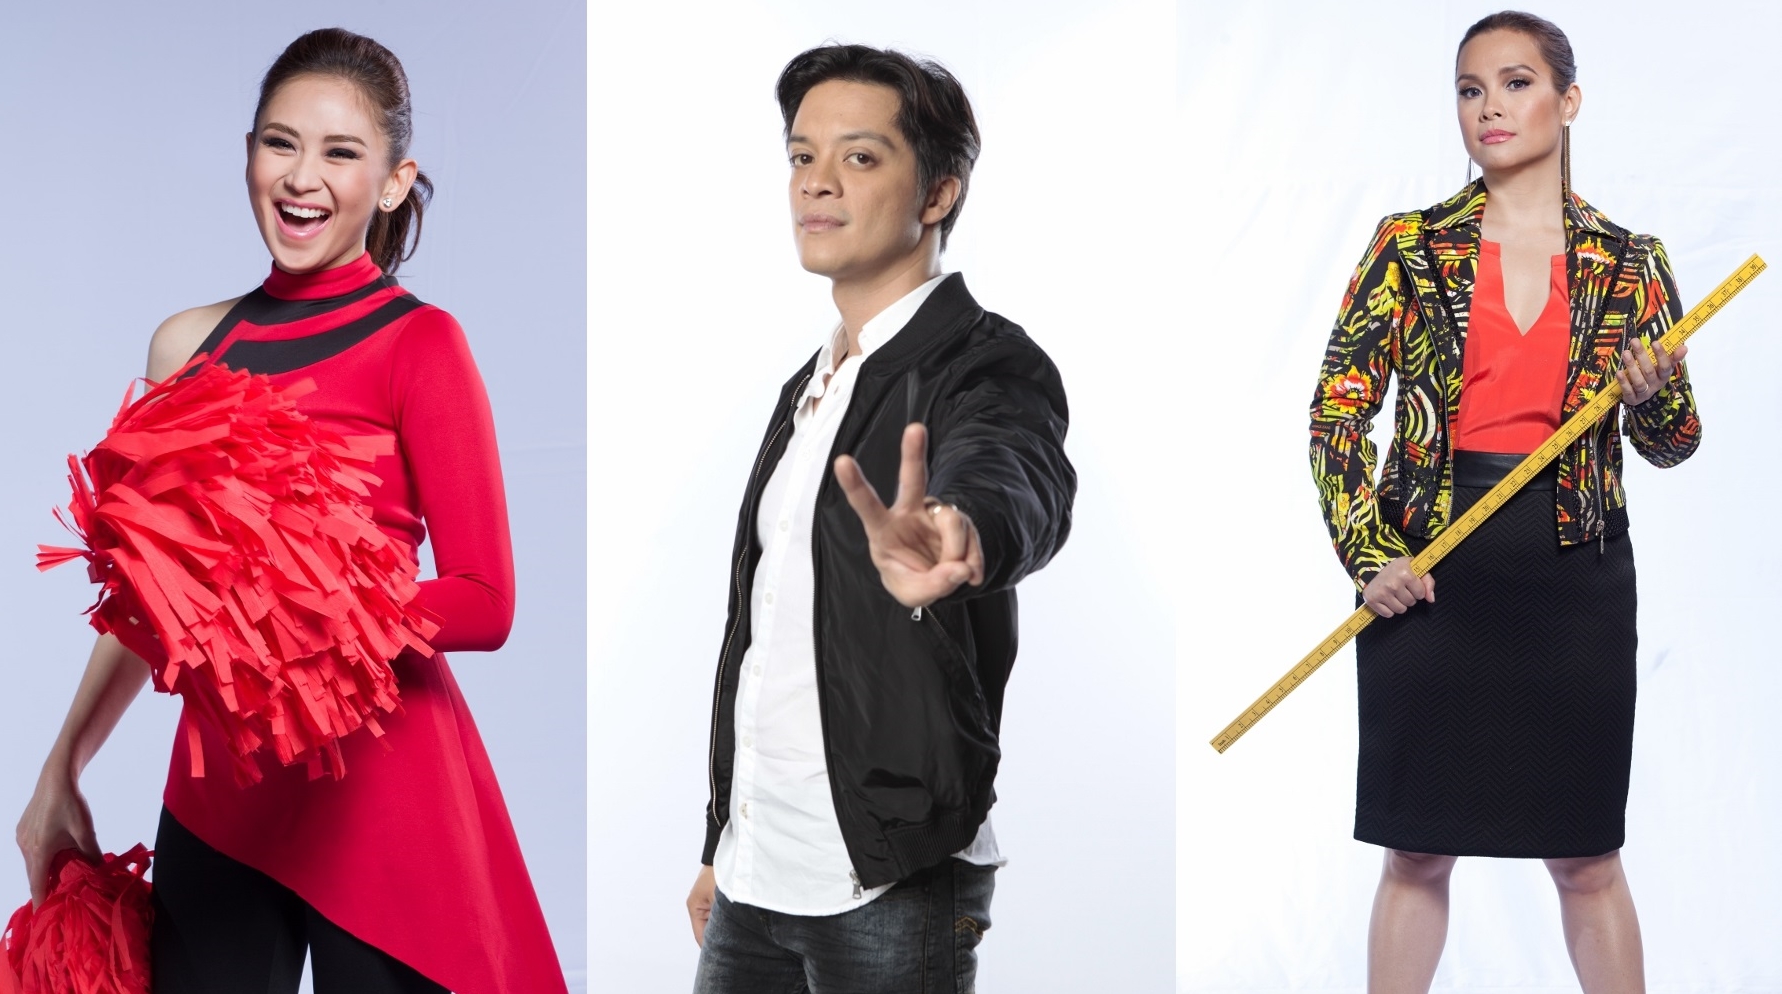 "The Voice Kids" Season 2 Blind Auditions premiere on June 6